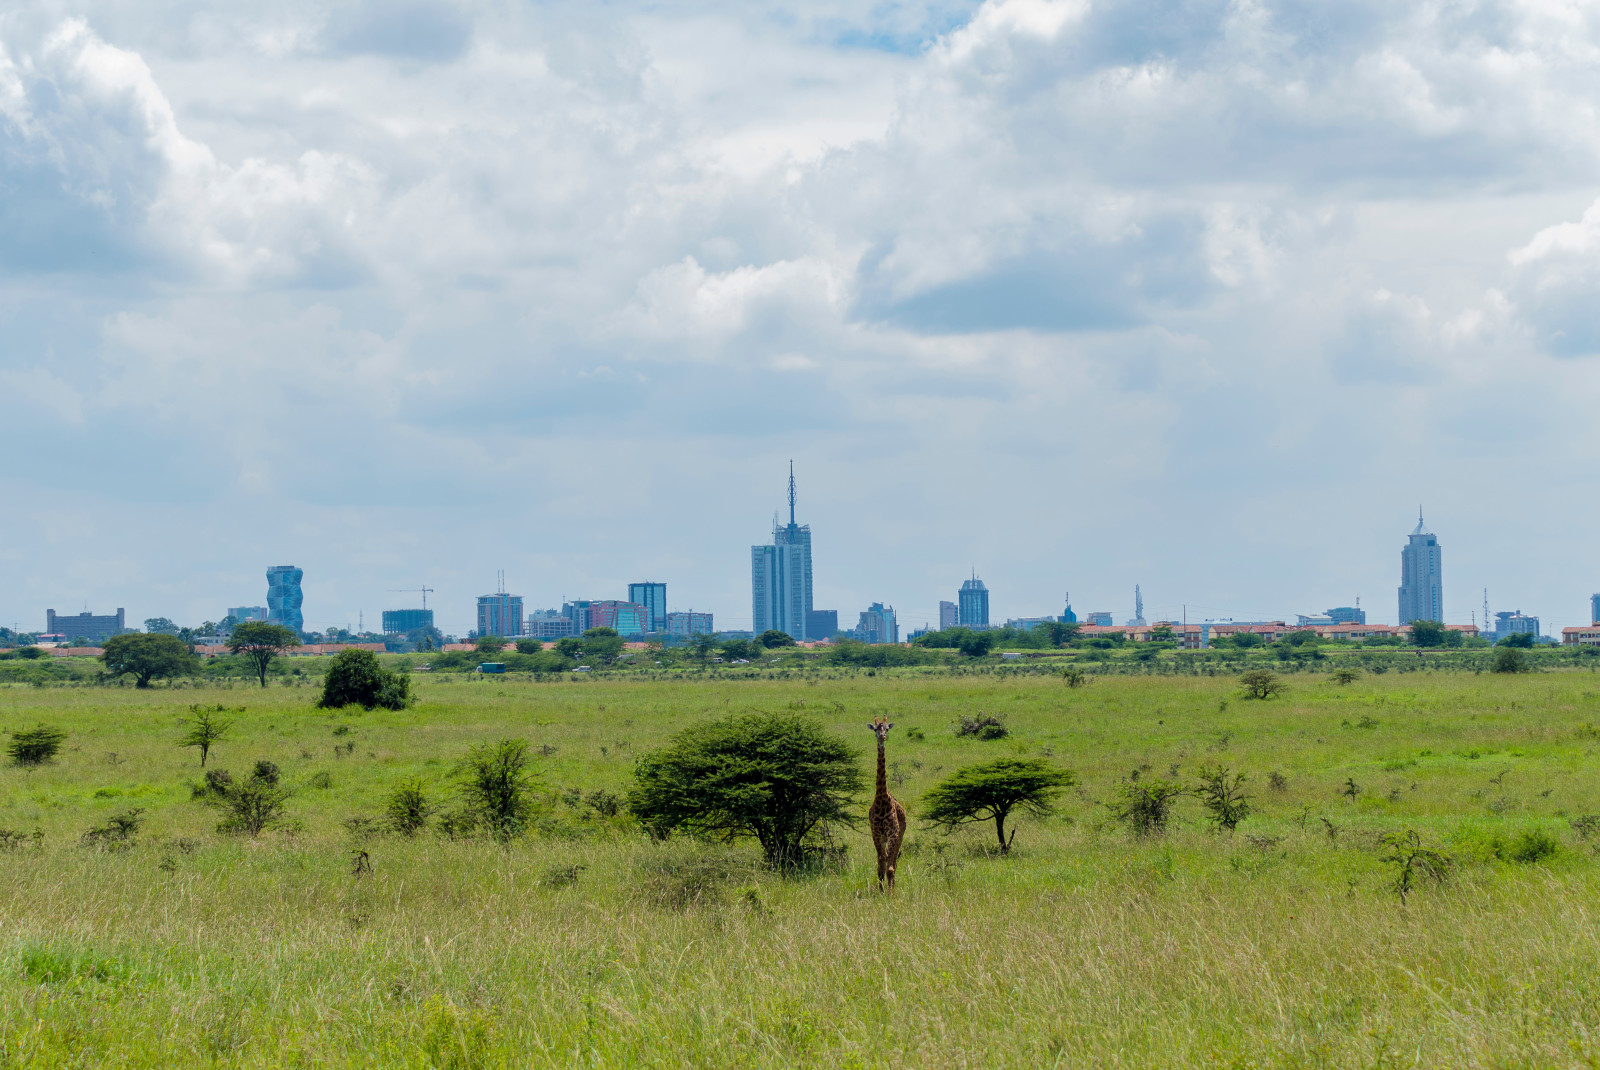 View of grassy area and a giraffe with downtown Kenya in the background